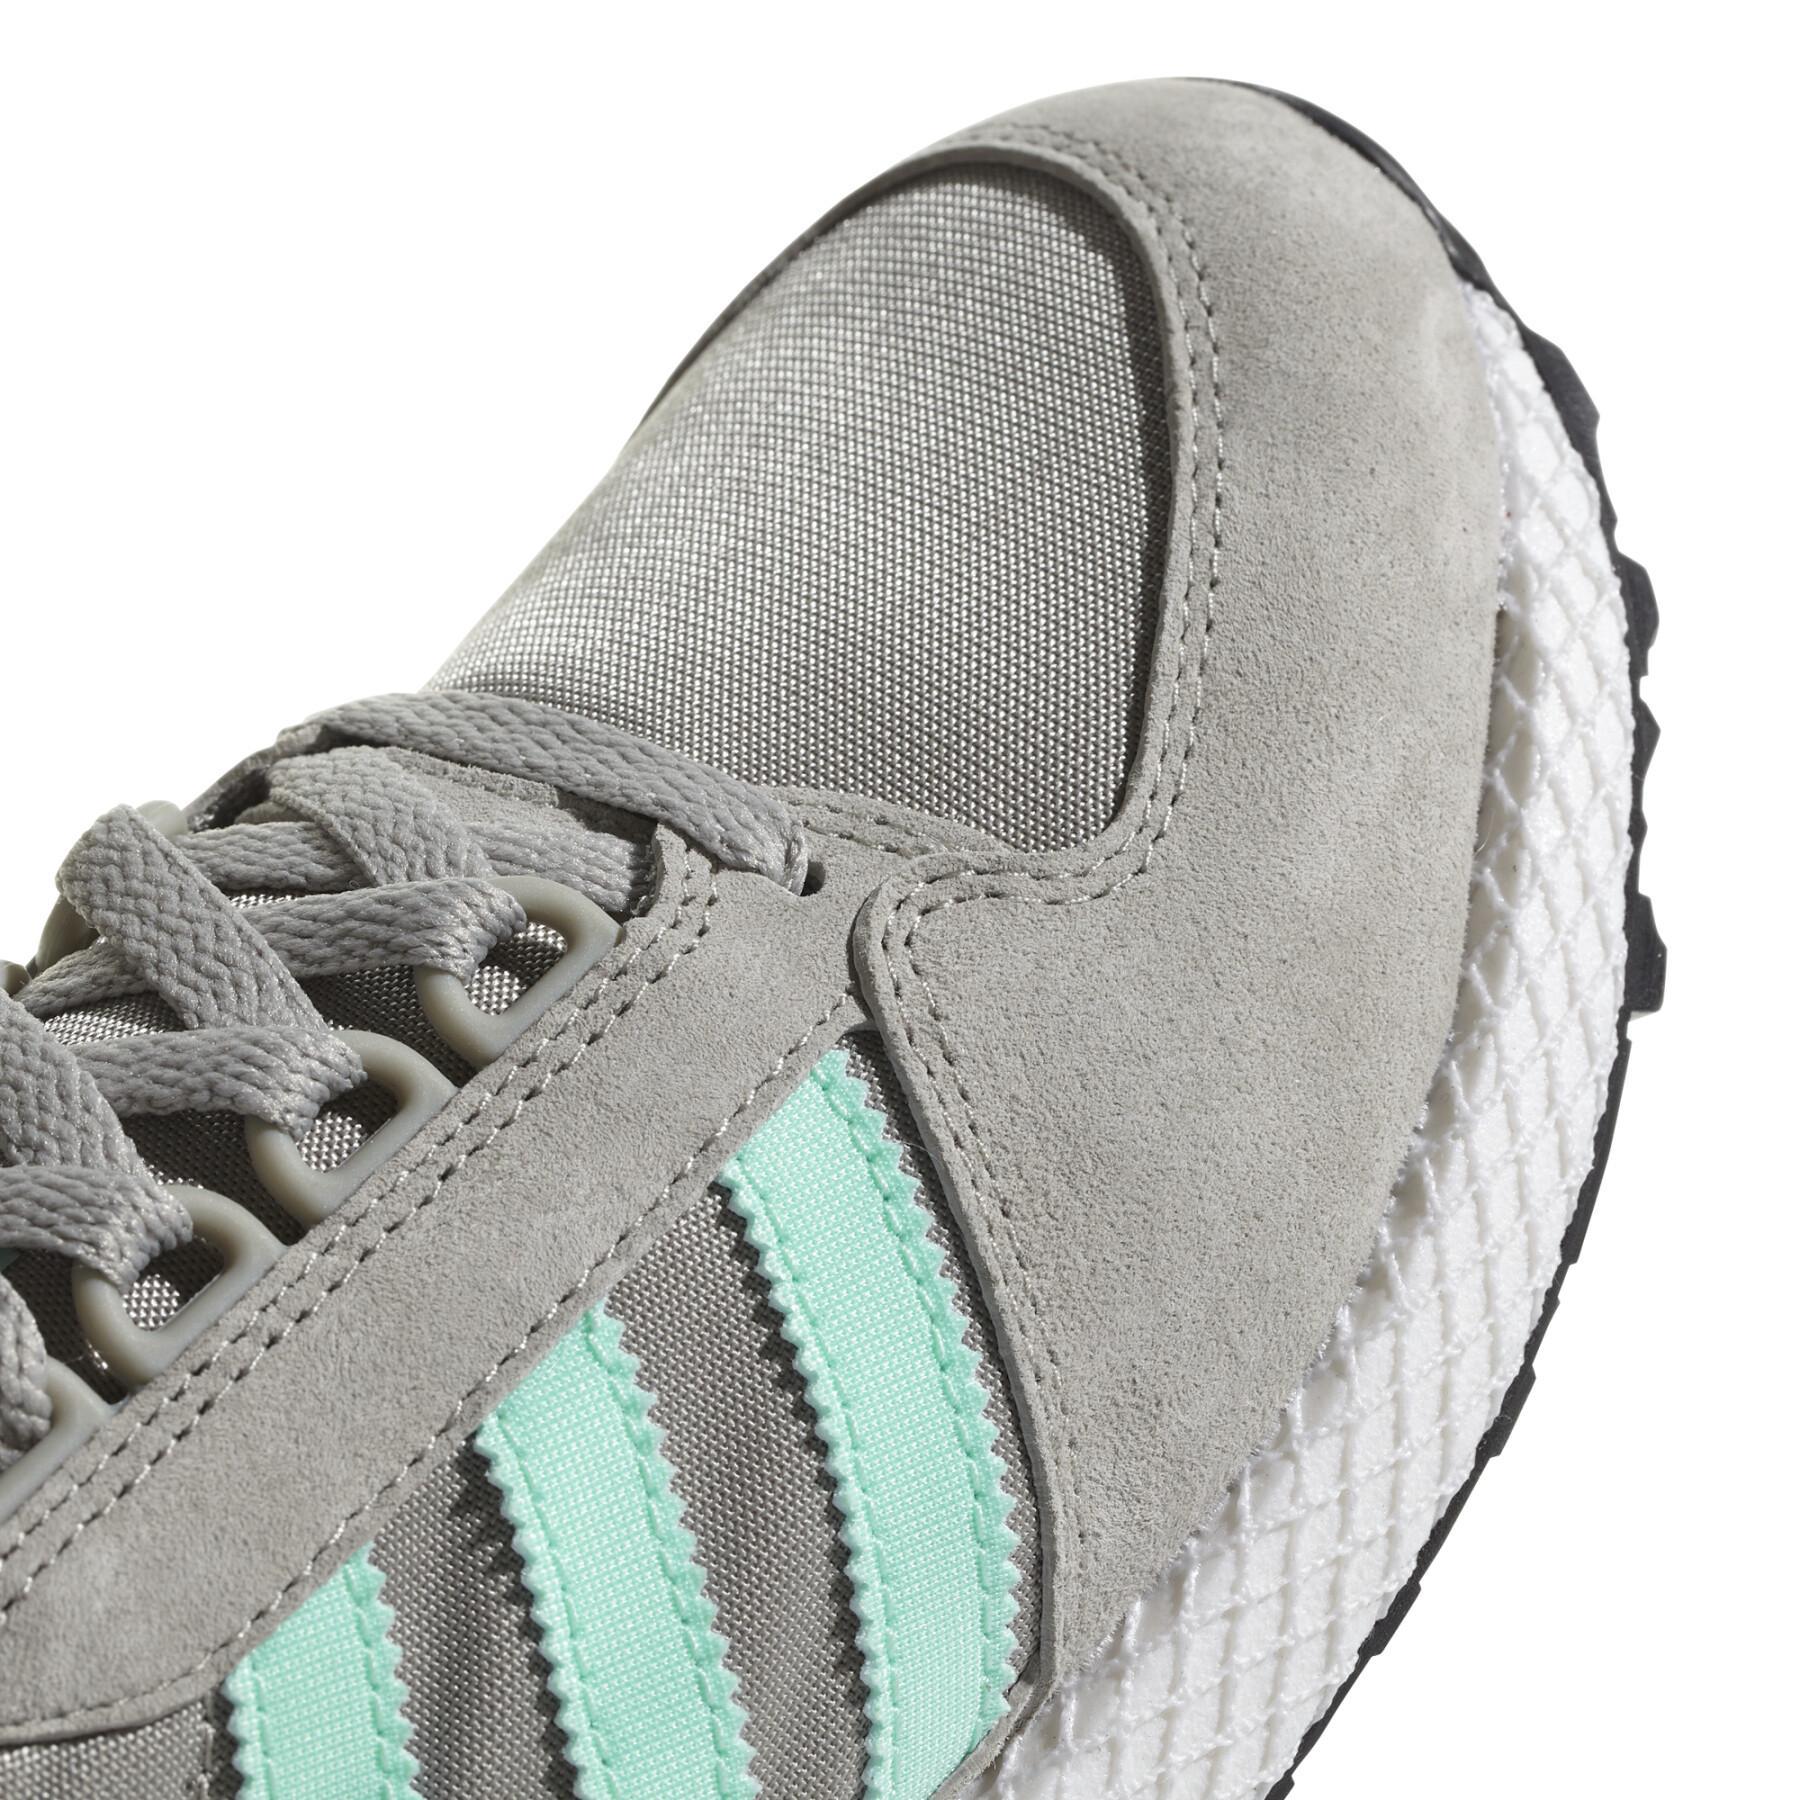 Women's sneakers adidas Forest Grove